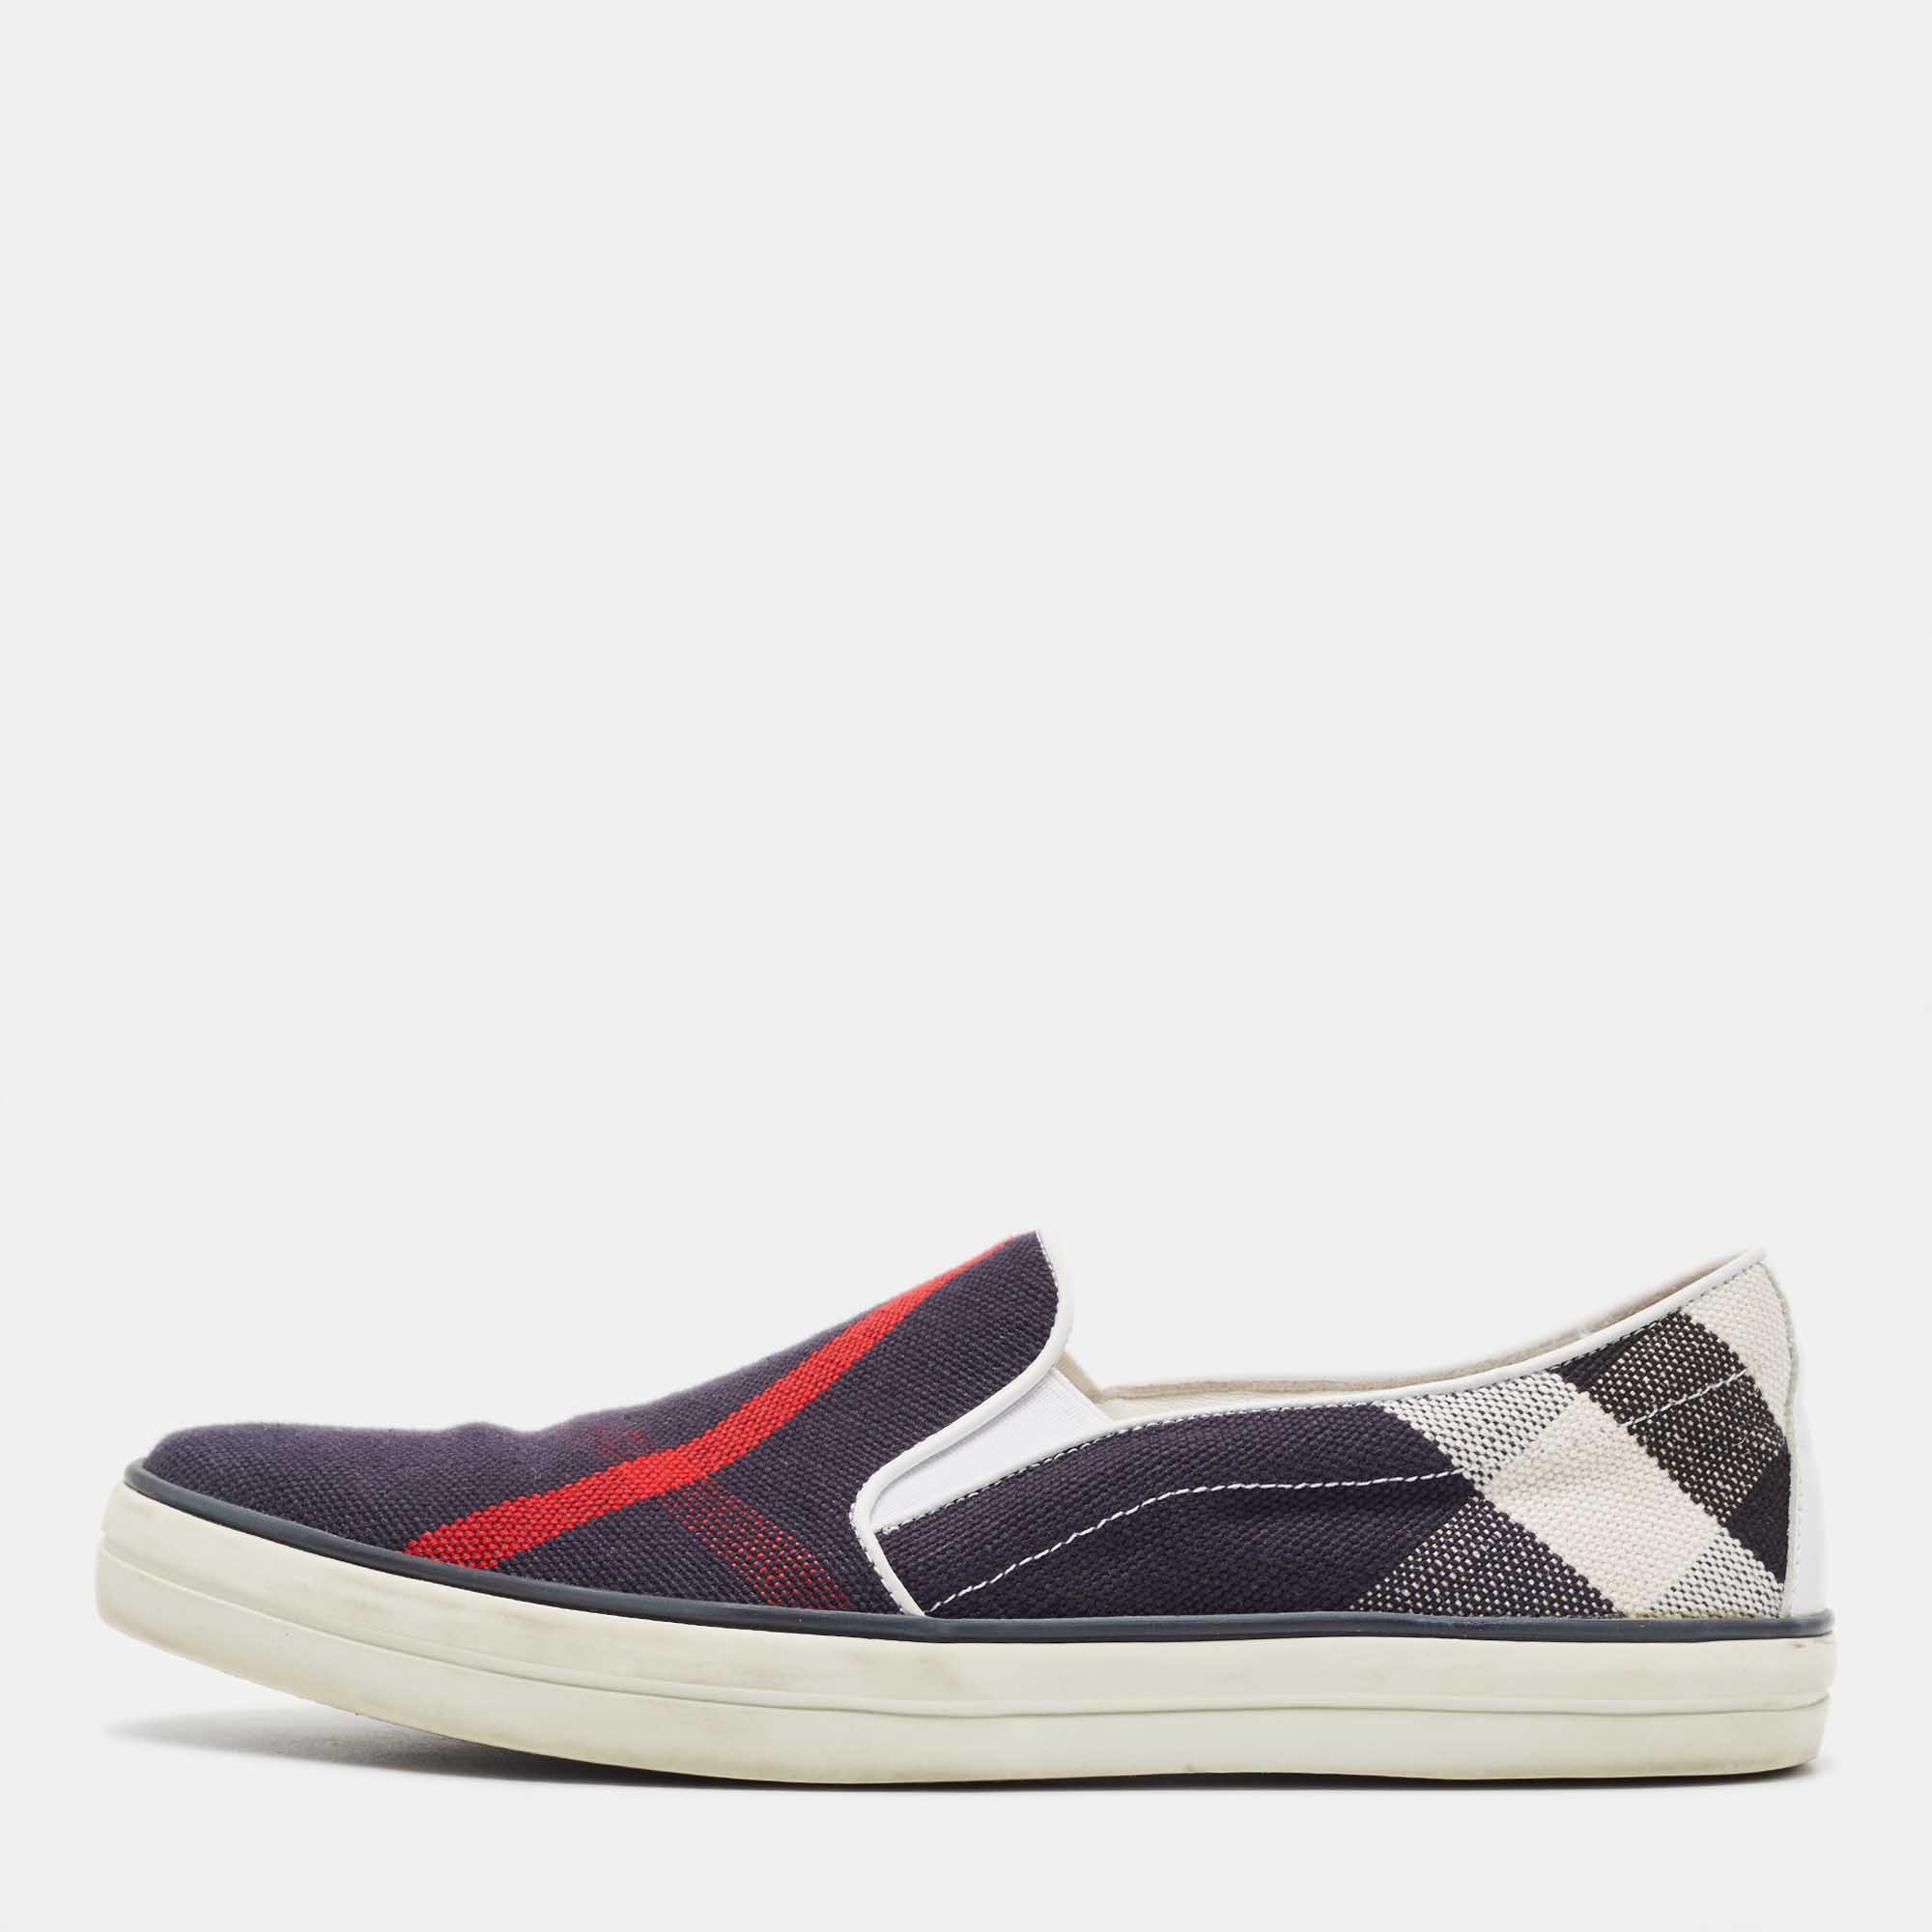 Burberry Multicolor Canvas And Leather Smoking Slipper Size 39.5